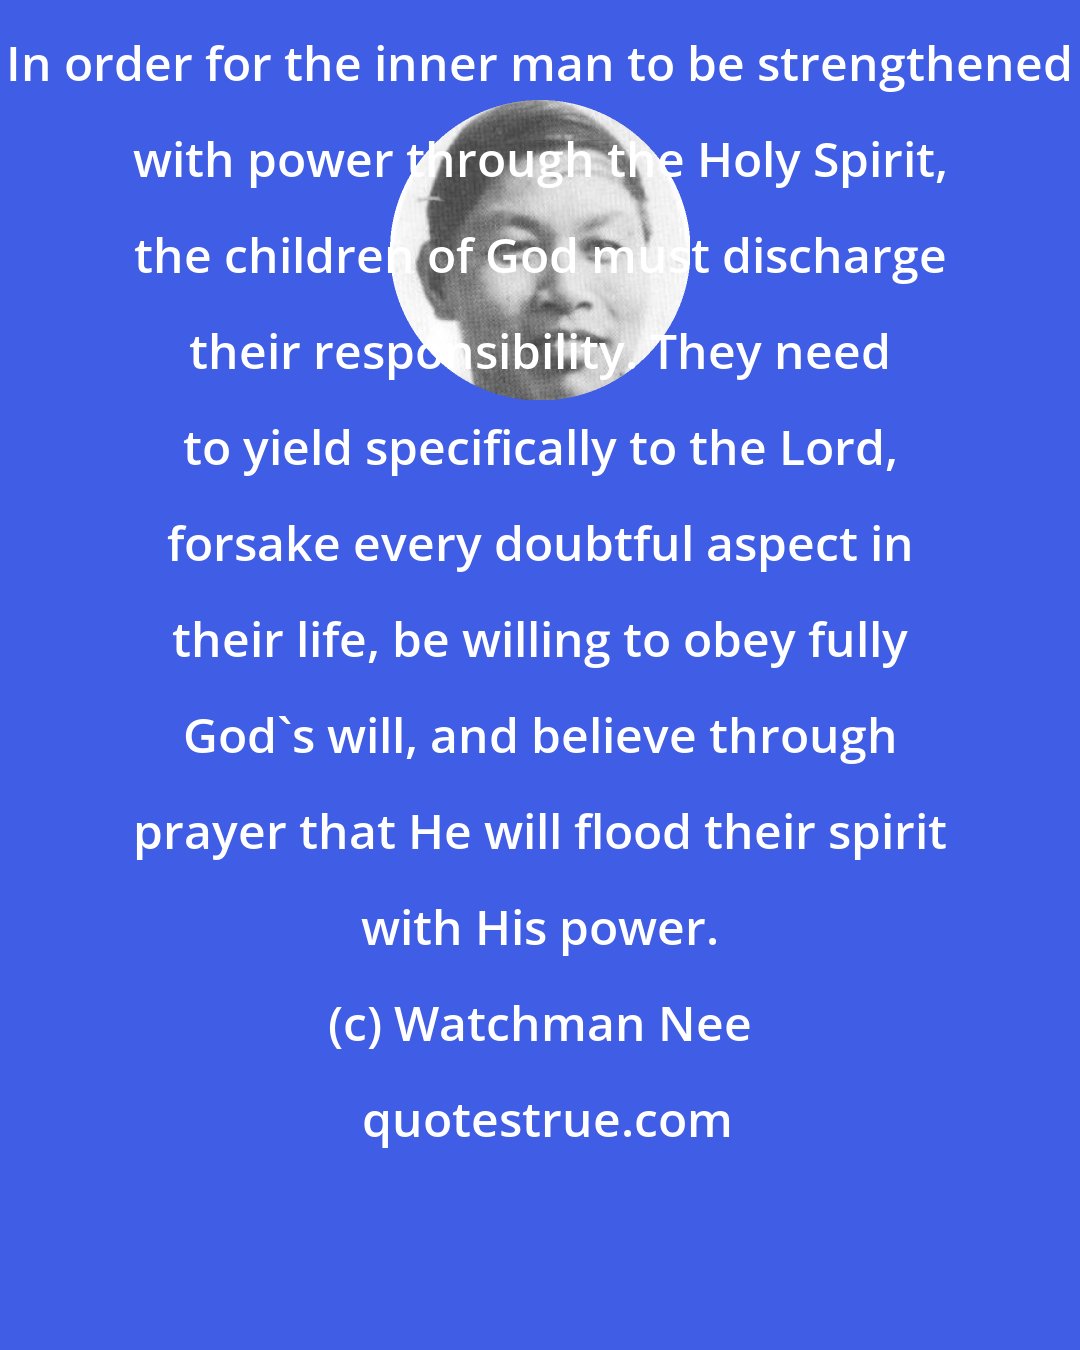 Watchman Nee: In order for the inner man to be strengthened with power through the Holy Spirit, the children of God must discharge their responsibility. They need to yield specifically to the Lord, forsake every doubtful aspect in their life, be willing to obey fully God's will, and believe through prayer that He will flood their spirit with His power.